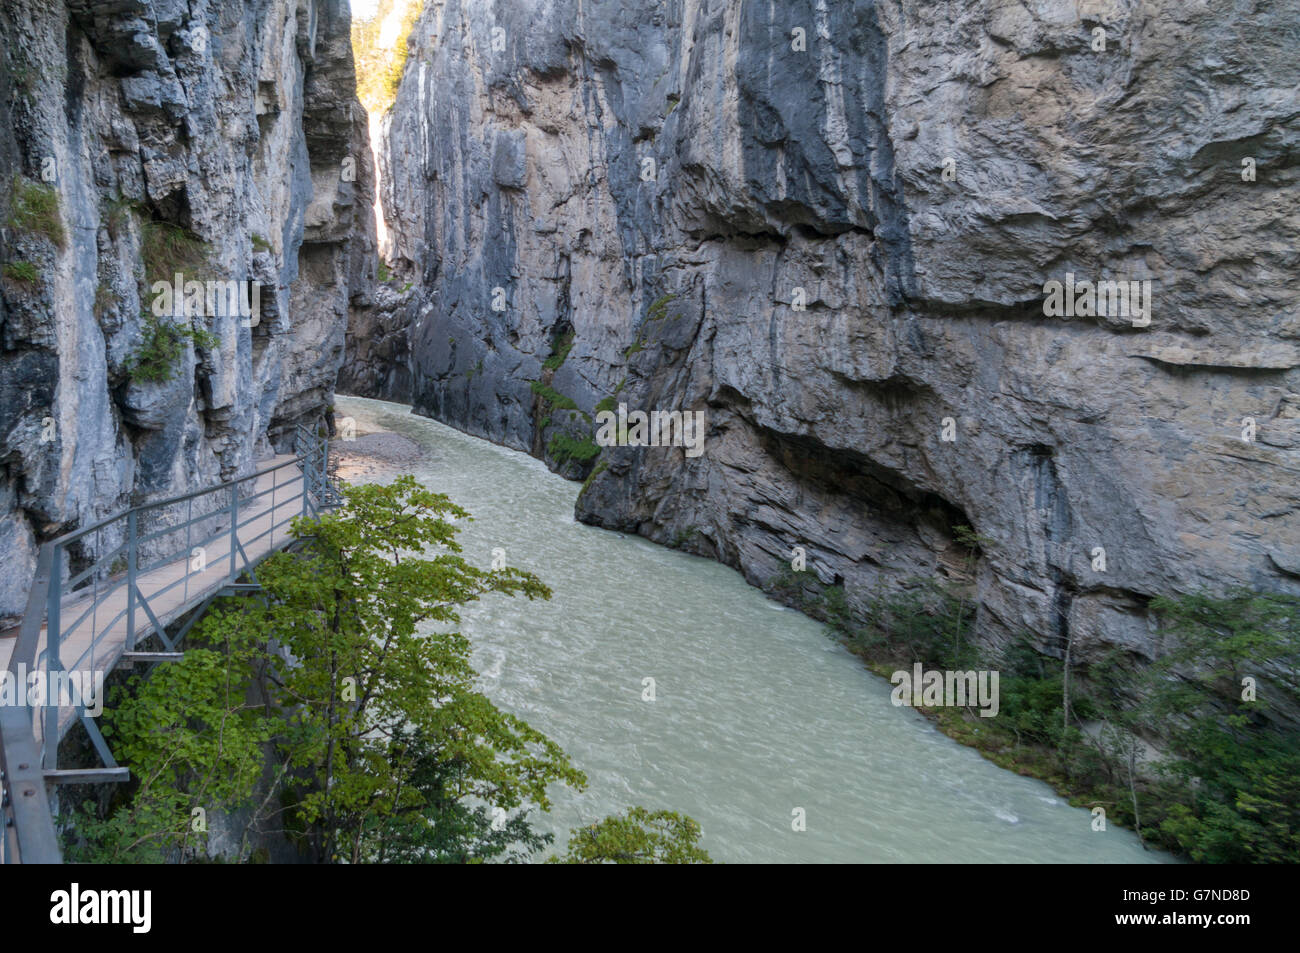 Aareschlucht, a gorge of Aare river carved deep into limestone, with up to 180m high cliff walls. Meiringen, Switzerland. Stock Photo